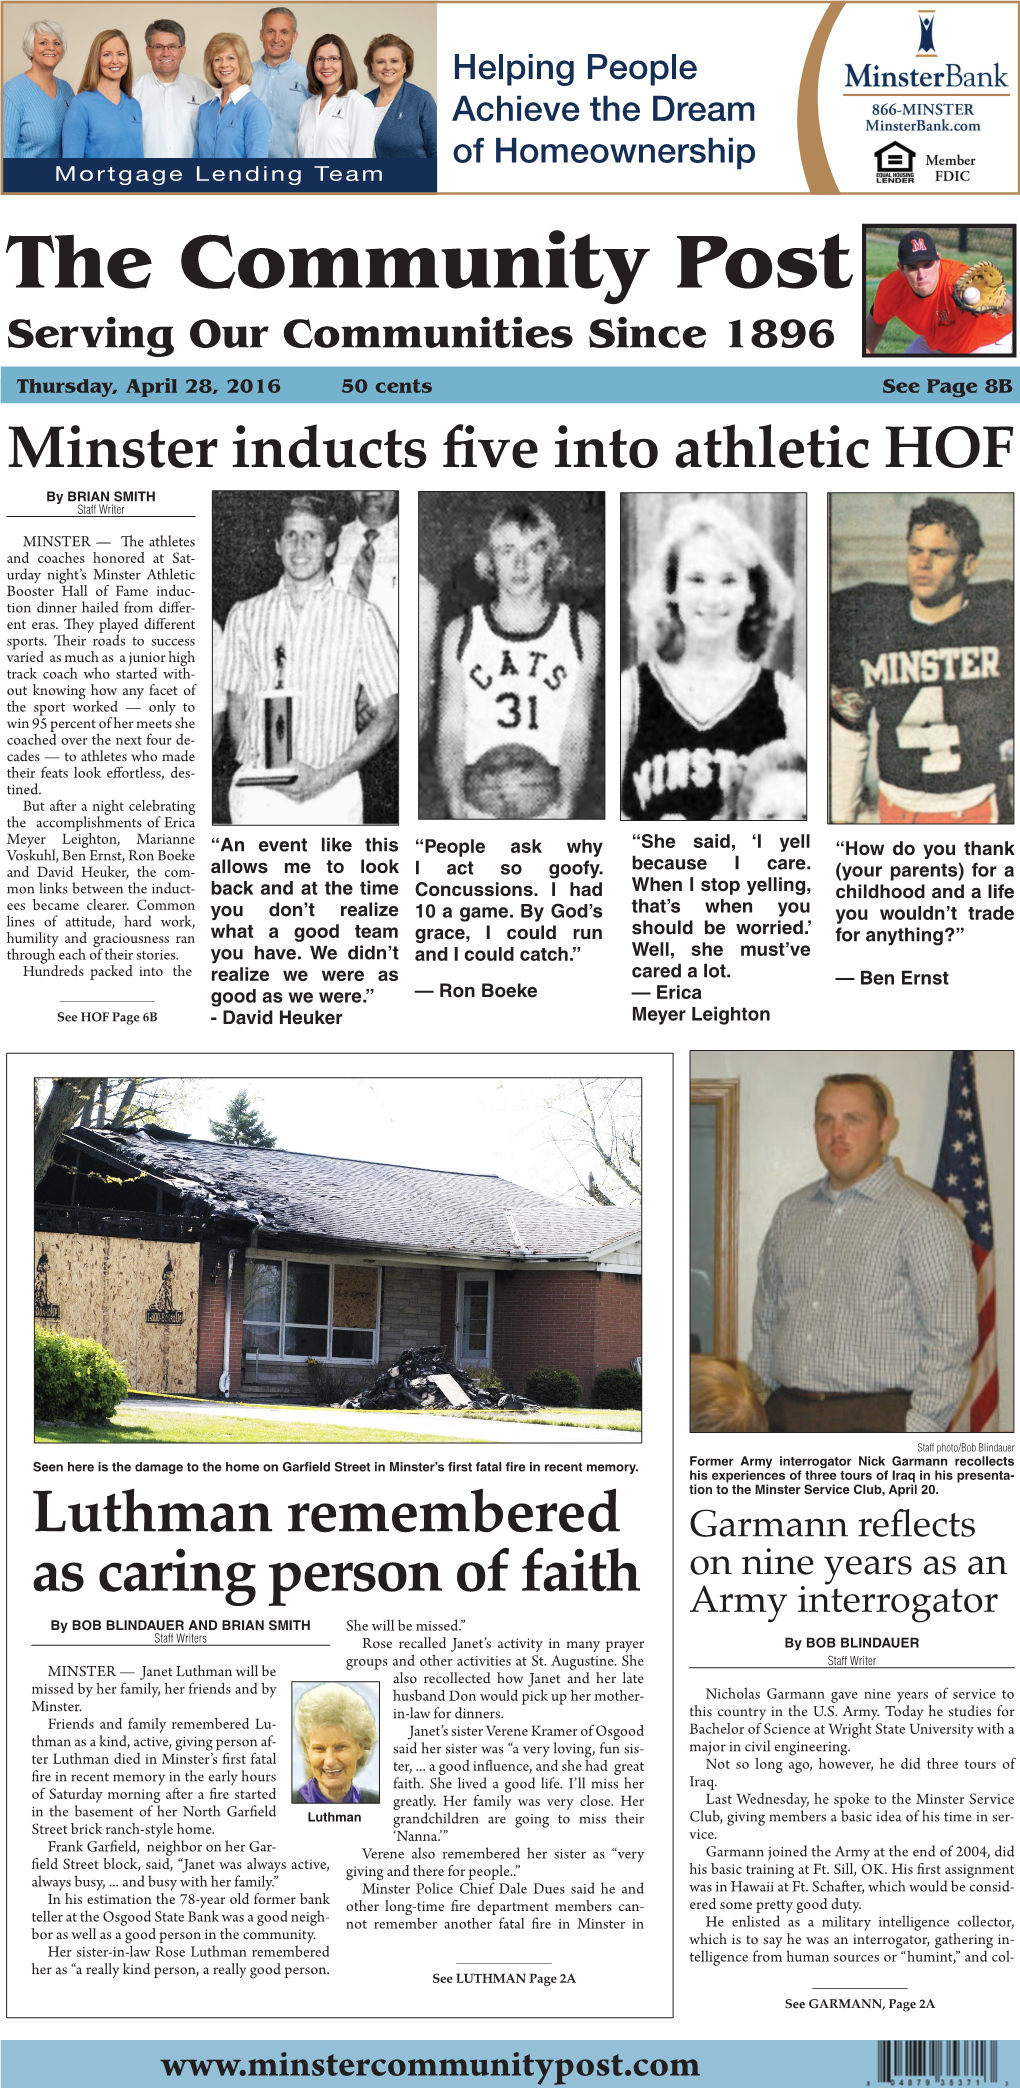 The Community Post Serving Our Communities Since 1896 Thursday, April 28, 2016 50 Cents See Page 8B Minster Inducts Five Into Athletic HOF by BRIAN SMITH Staff Writer